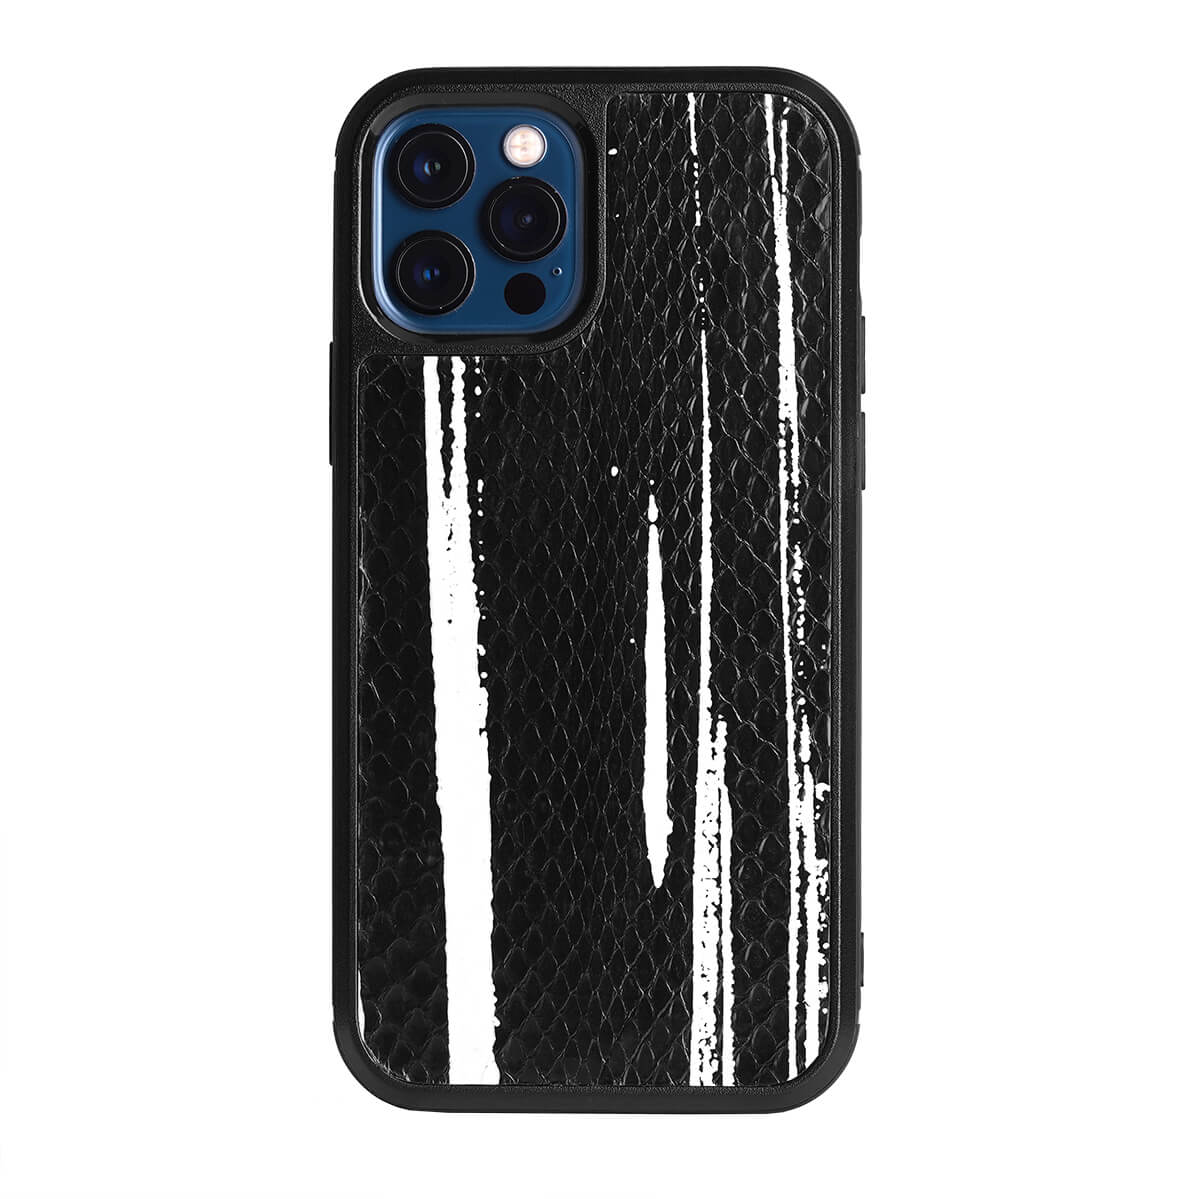 IPHONE 12 PRO & 12 CASES PYTHON BLACK AND WHITE